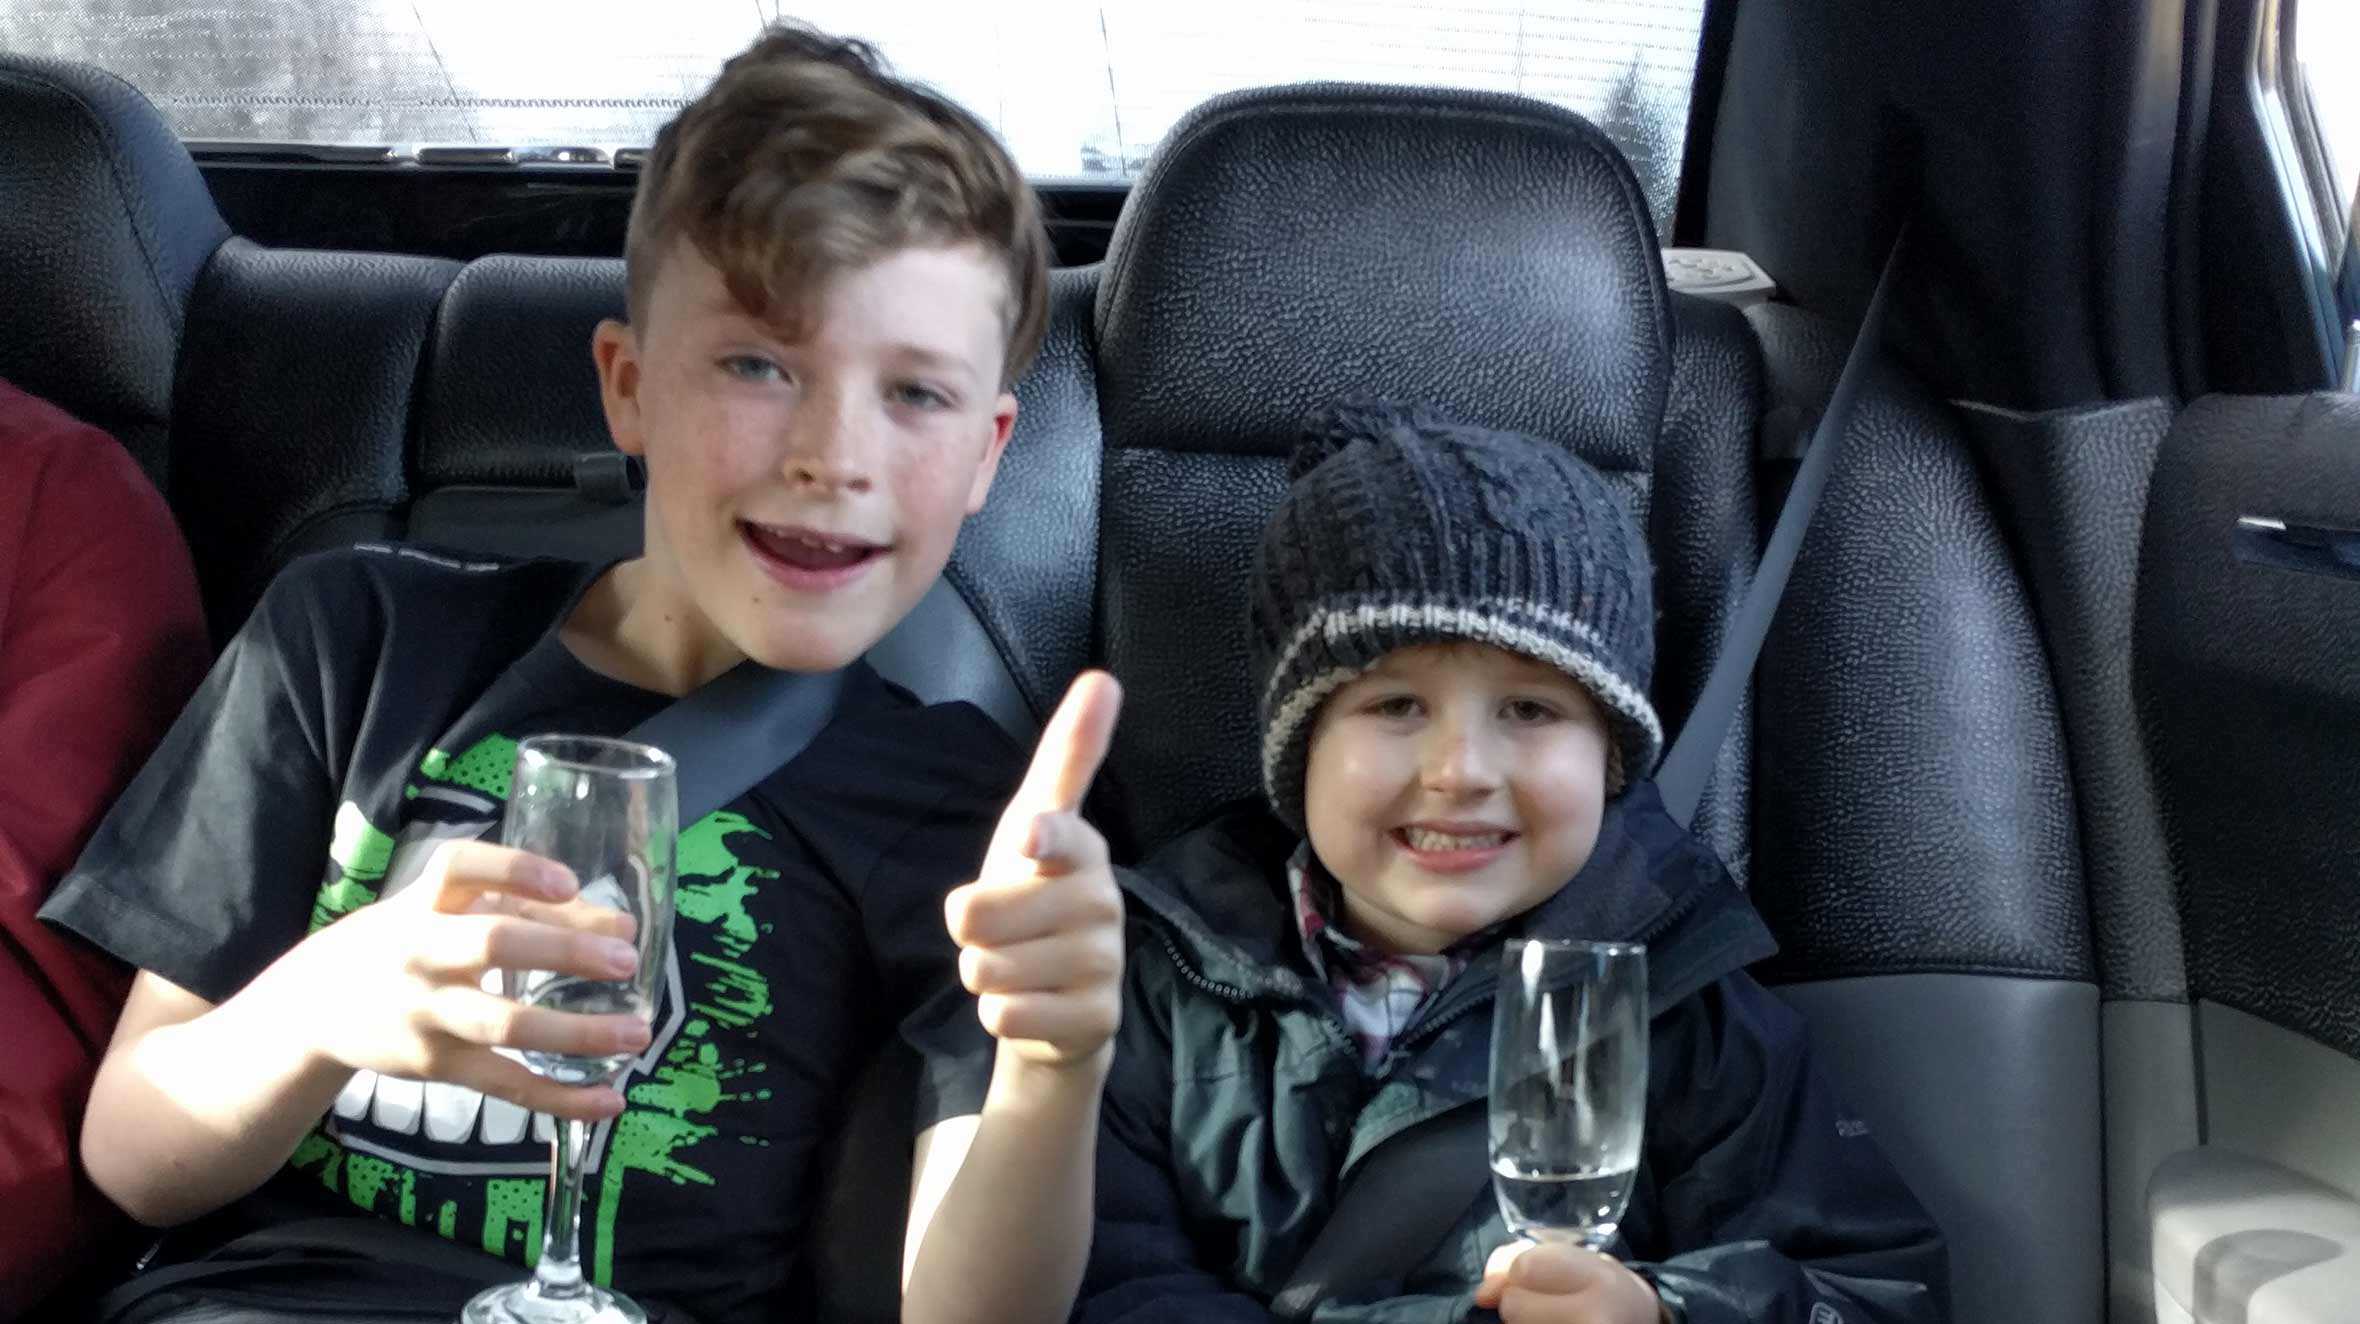 Joseph and his brother drinking fake Champagne in the limo